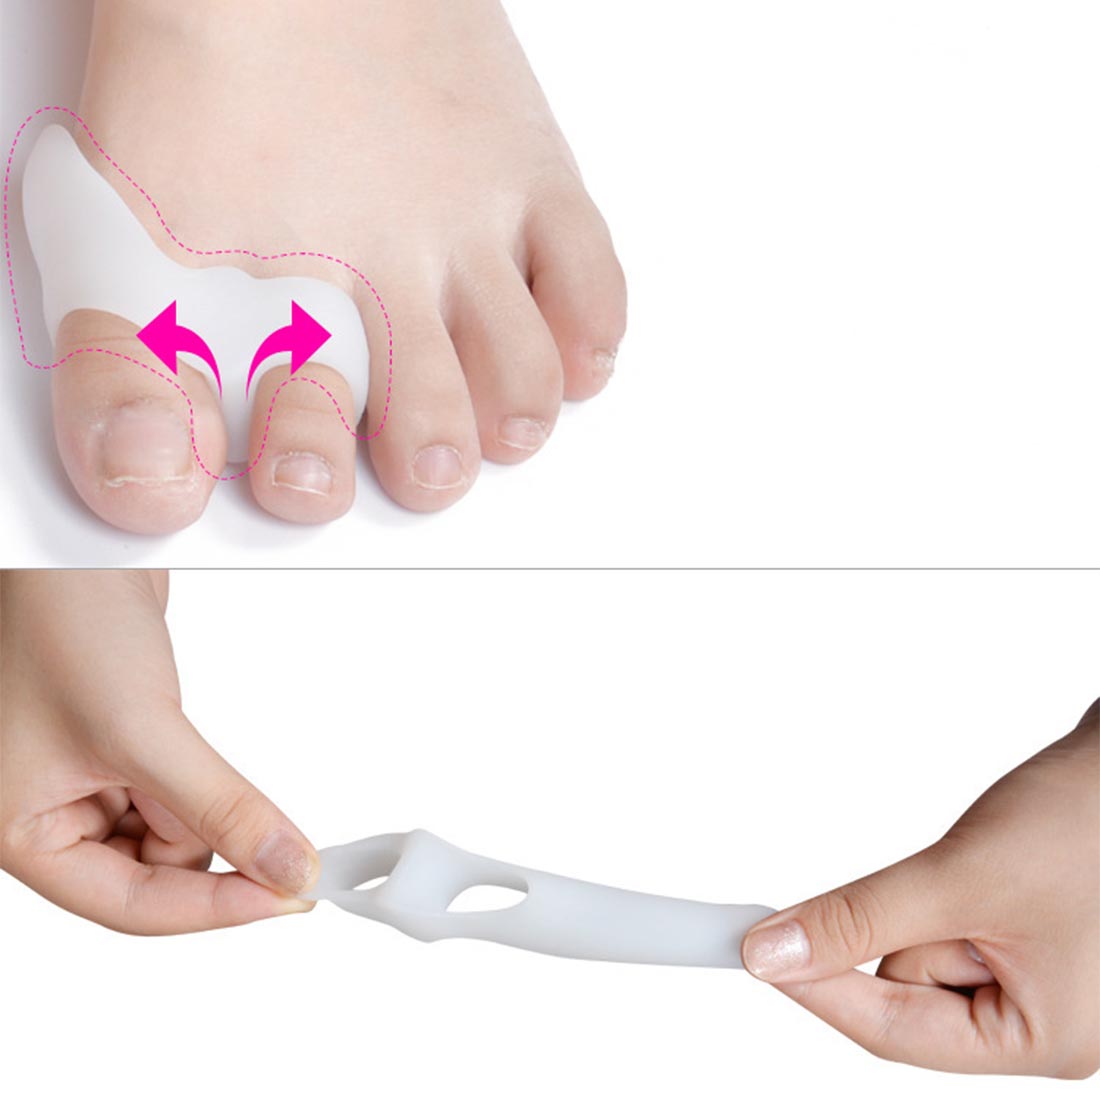 2pcs/set Silicone Corrector Straightener Splint Bunion Toe Protector Two Hole Toe Separator Pads Foot Care Tools